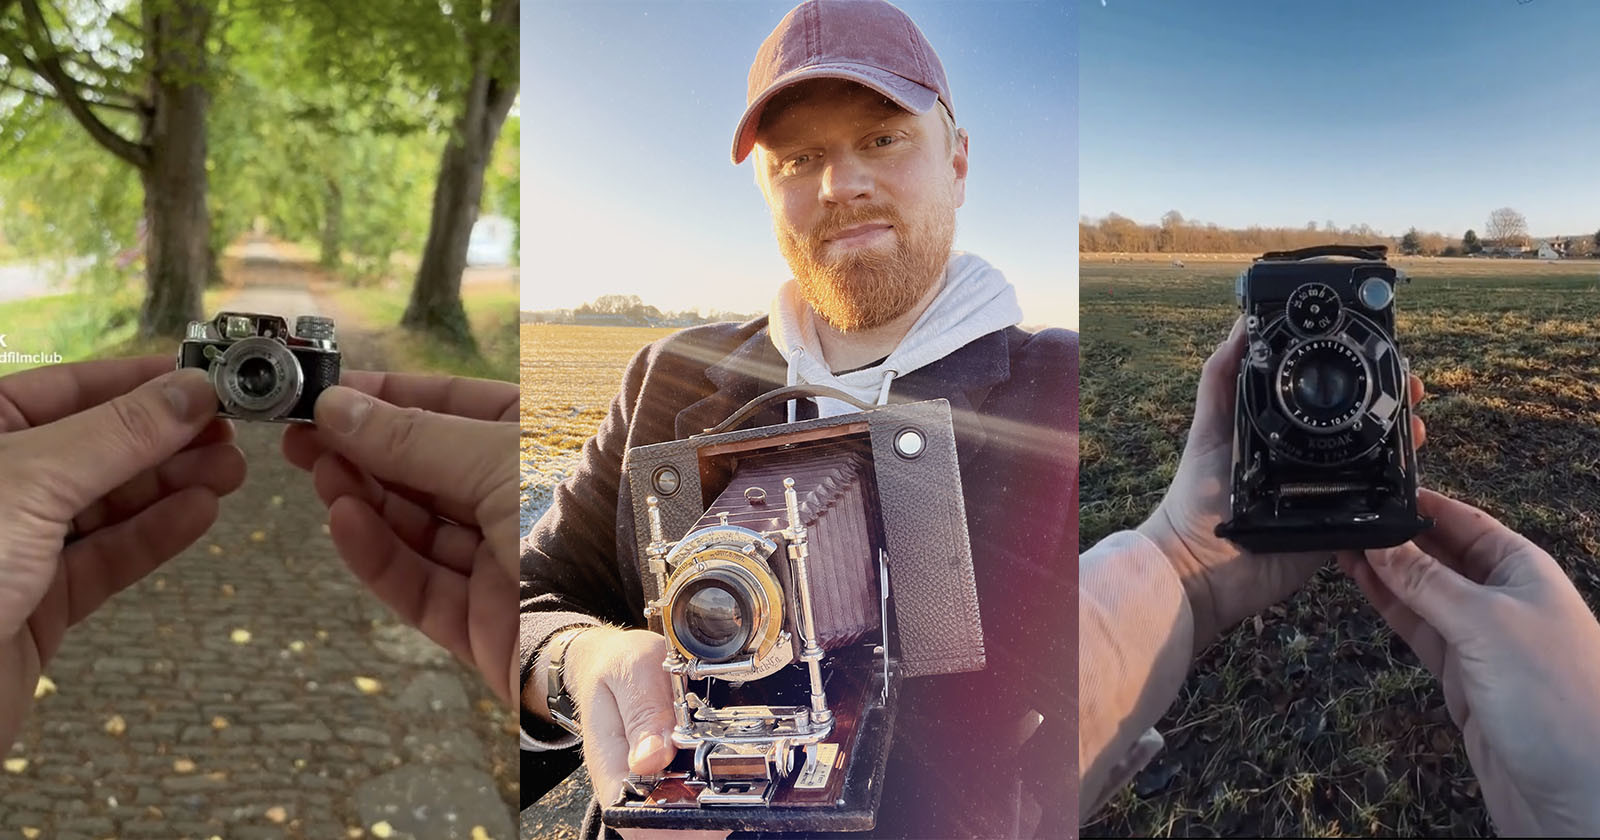 Photographer Becomes Internet Hit for Expired Film and Unusual Cameras